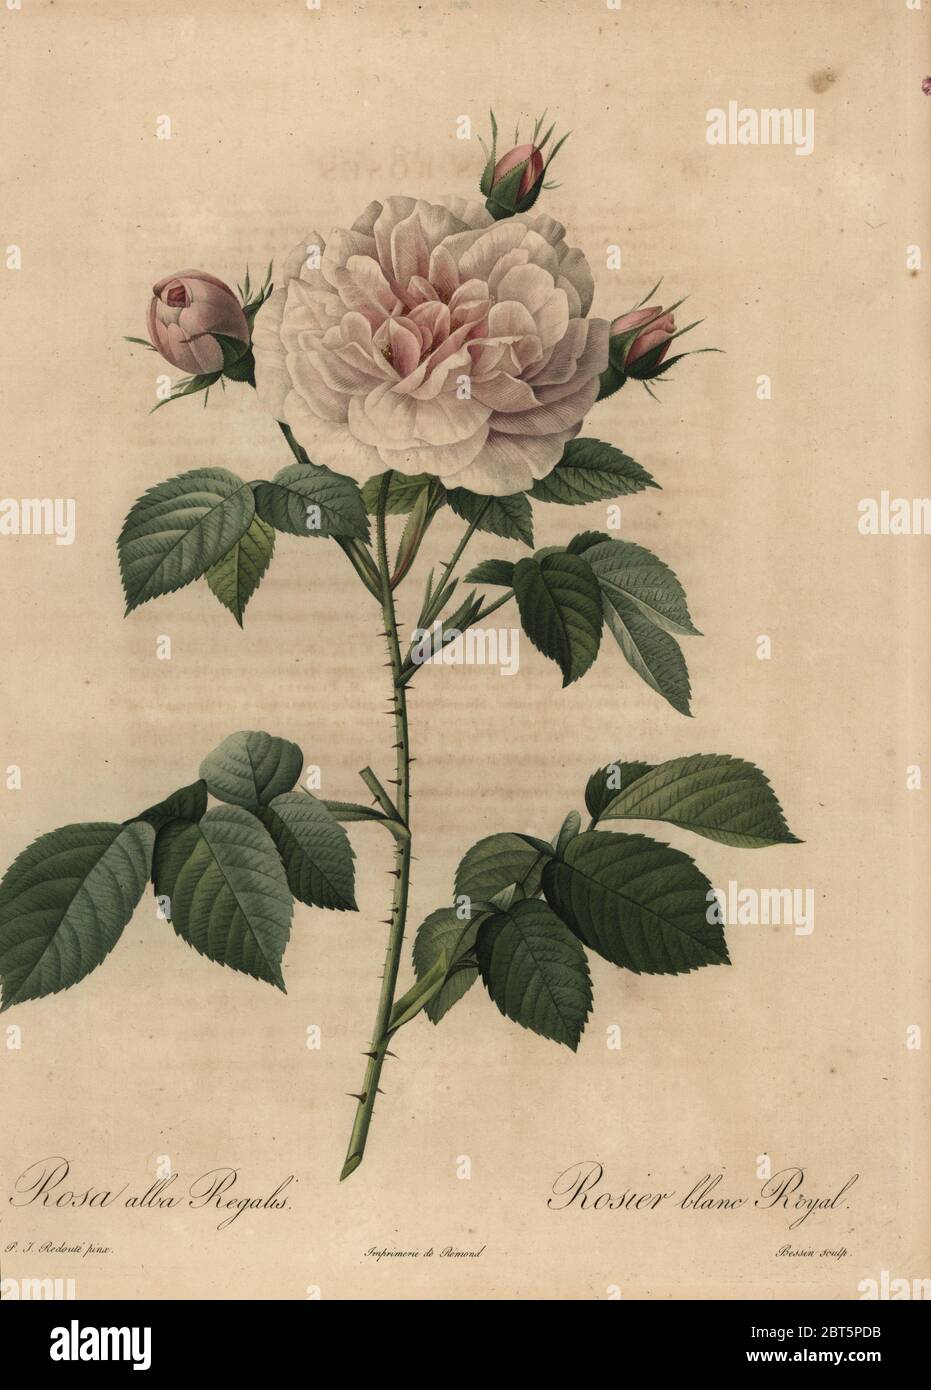 White rose hybrid Royal, Rosa alba regalis, Rosier blanc Royal. Stipple copperplate engraving by Rosine-Antoinette Bessin handcoloured a la poupee after a botanical illustration by Pierre-Joseph Redoute from the first folio edition of Les Roses, Firmin Didot, Paris, 1817. Stock Photo